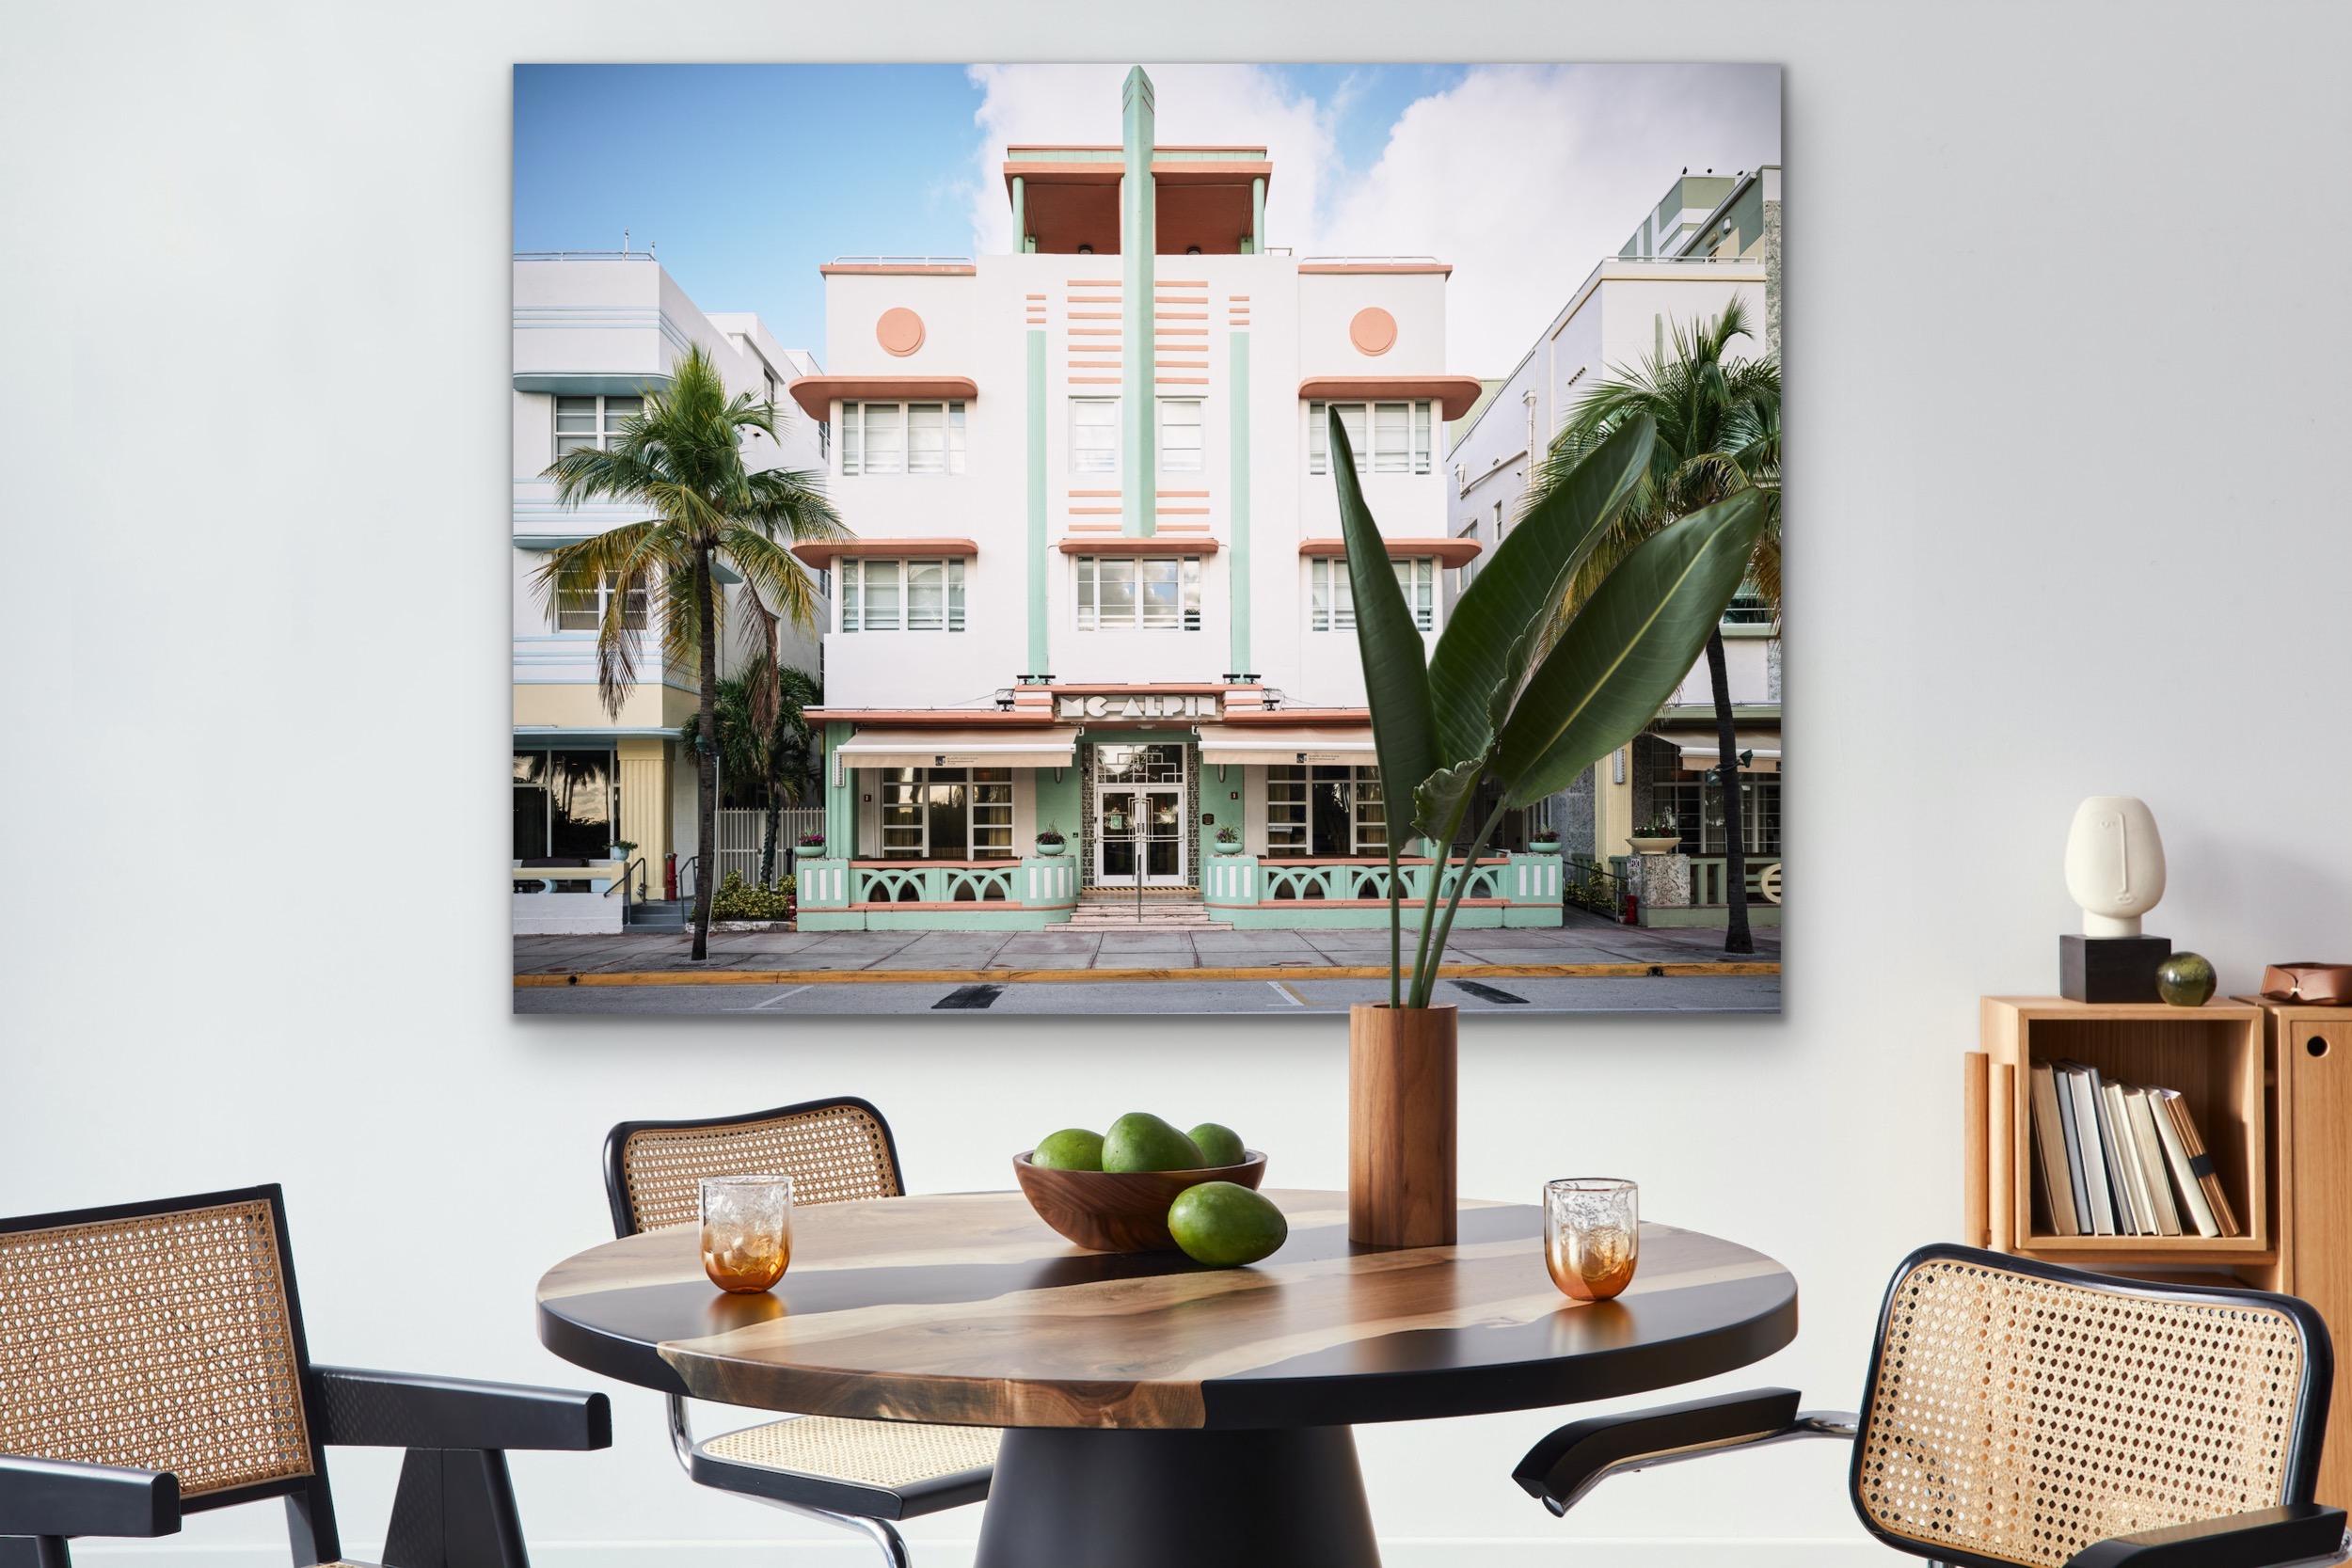 This contemporary urban photograph by Peter Mendelson captures the Deco style MC Alpin building in Miami Beach, Florida, with palm trees and neighboring Deco style buildings on either side. 

This is a metal sublimation print. The frame on an